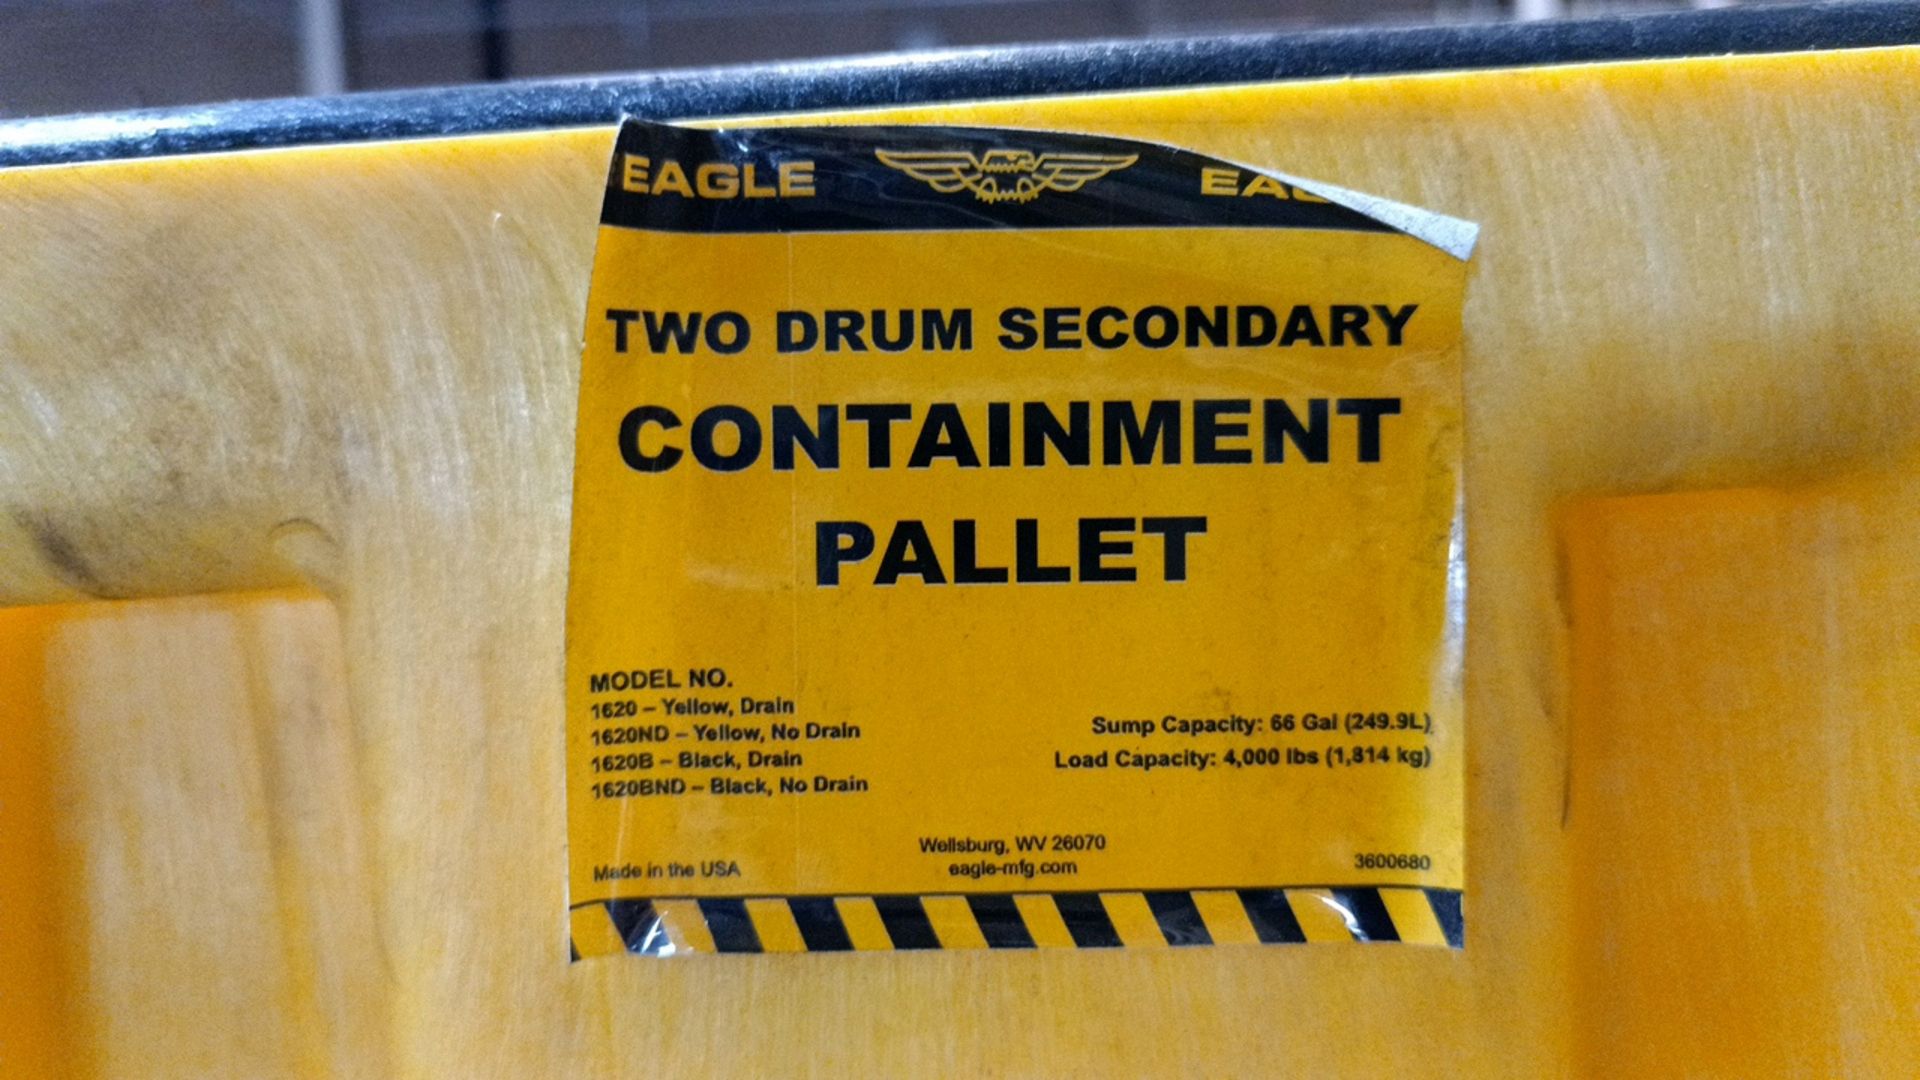 Drum Containment Pallets - Image 5 of 6